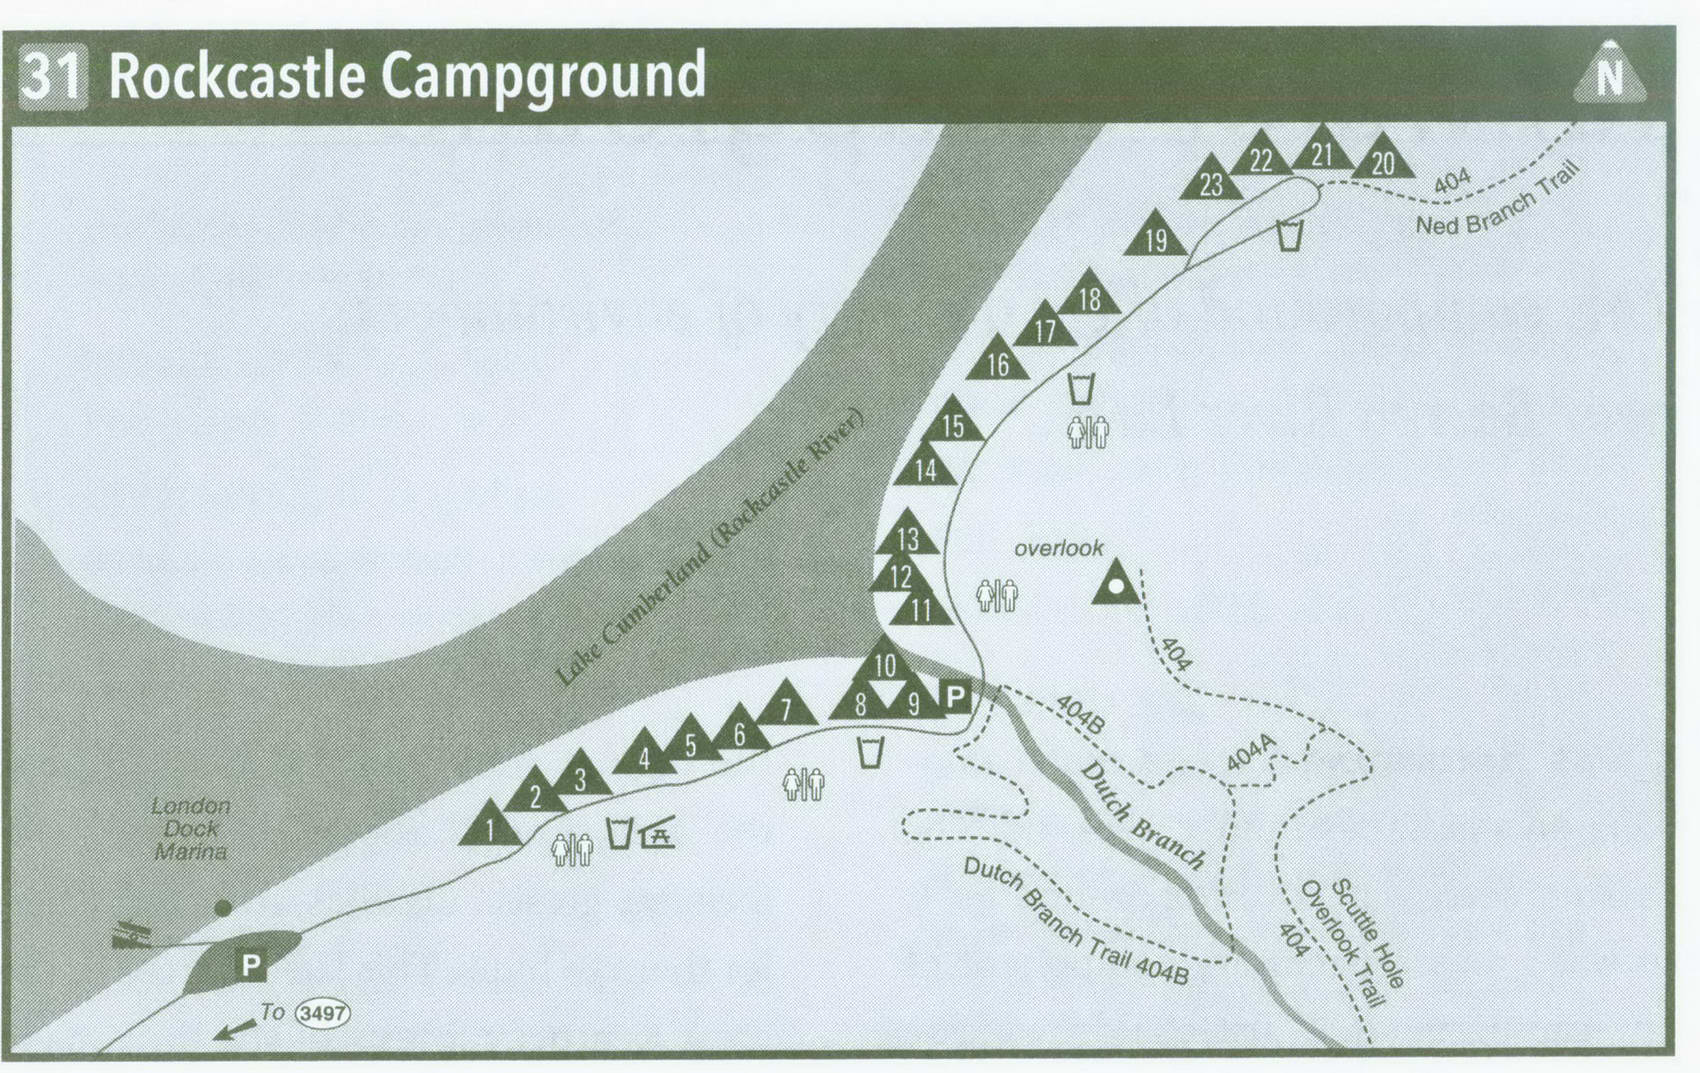 Plan of Rockcastle Campground